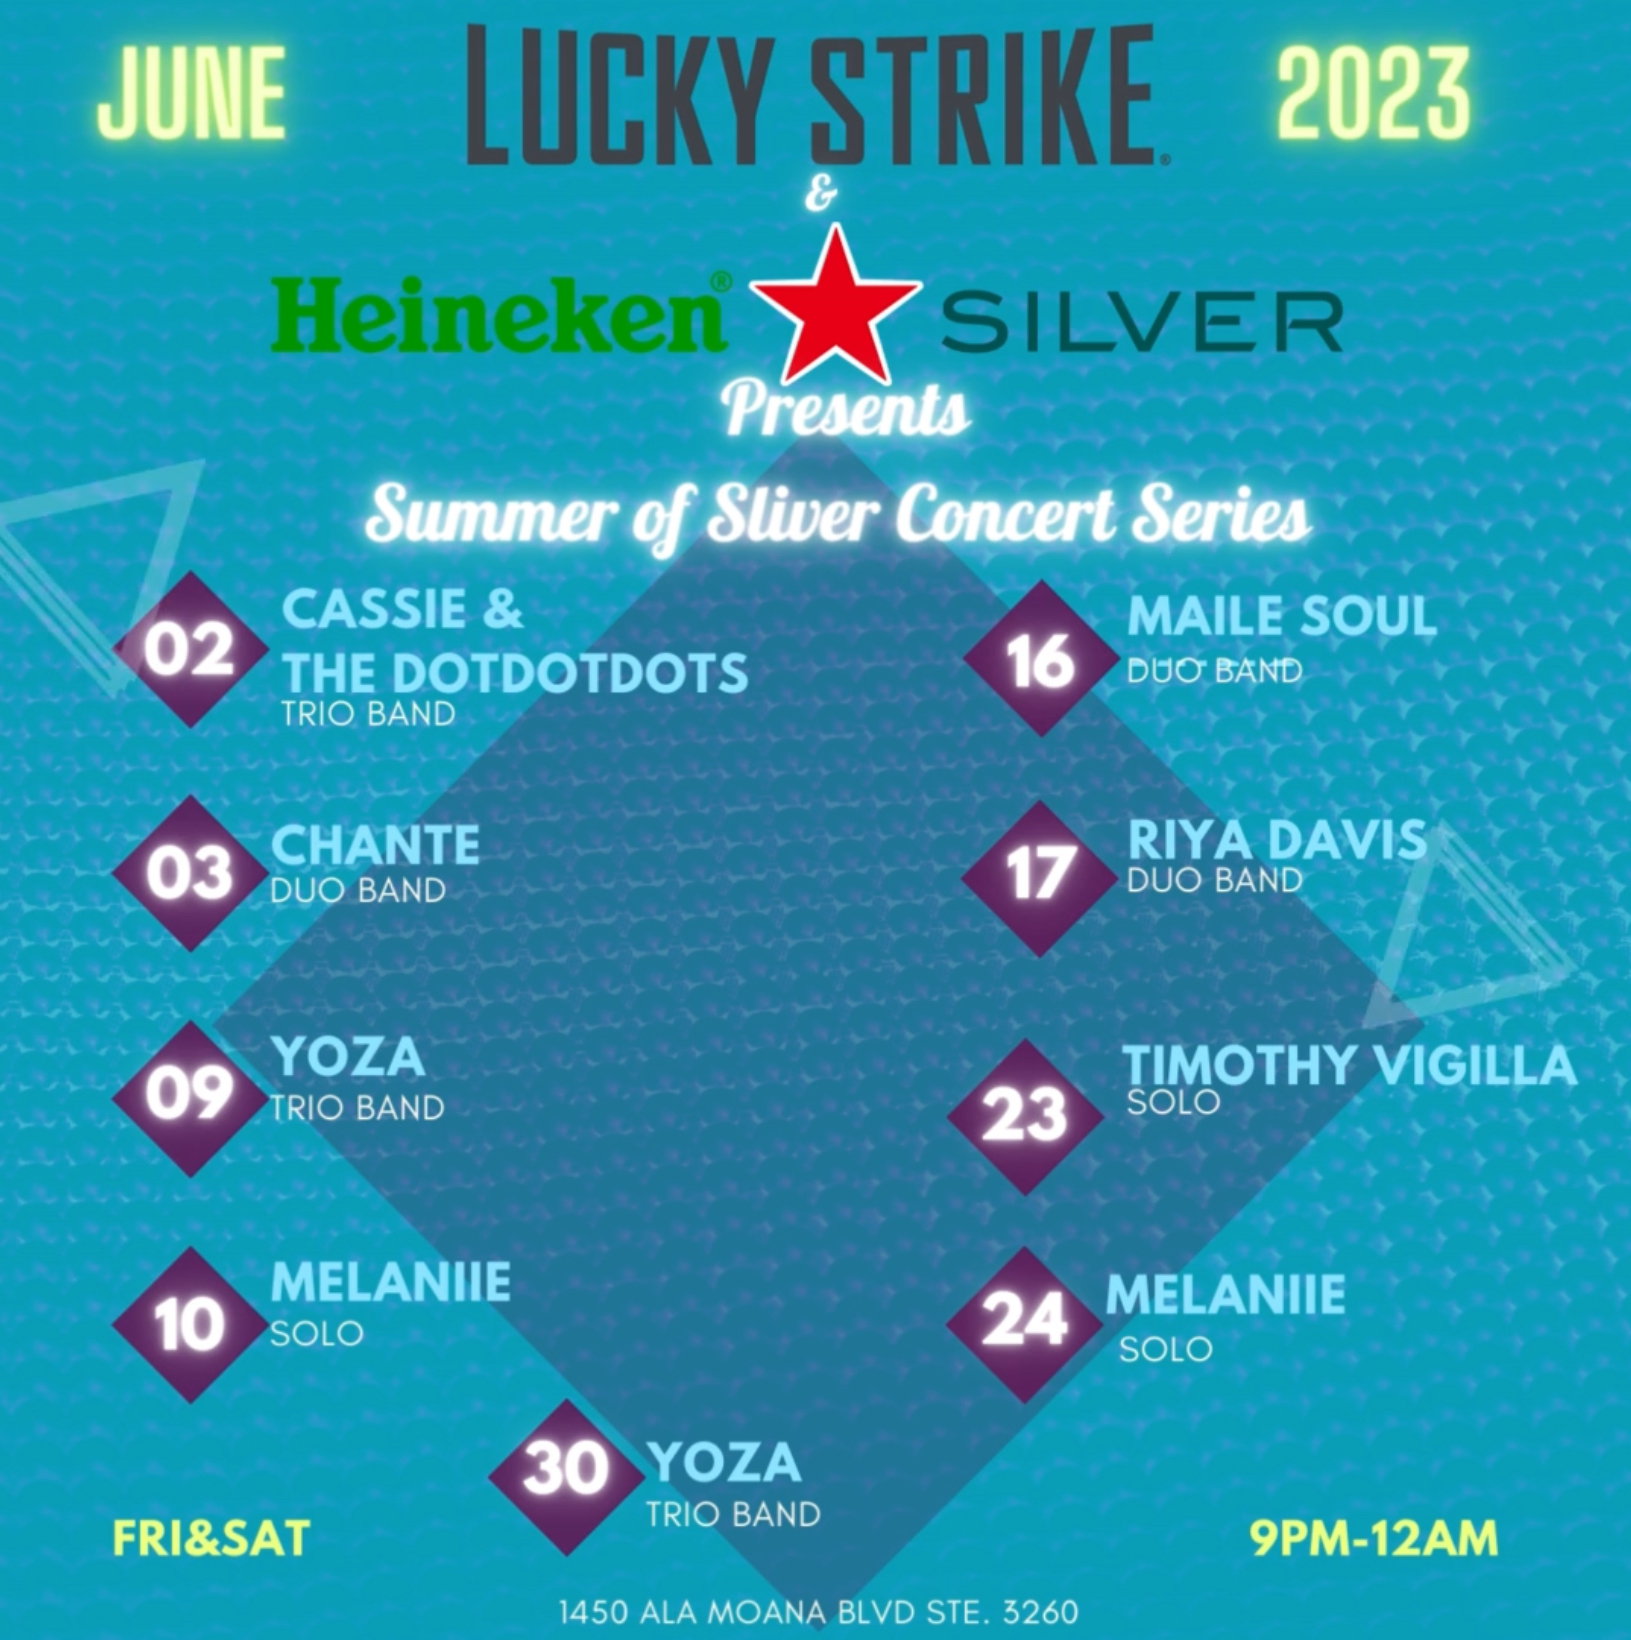 Summer of Silver Concert Series from LUCKY STRIKE SOCIAL